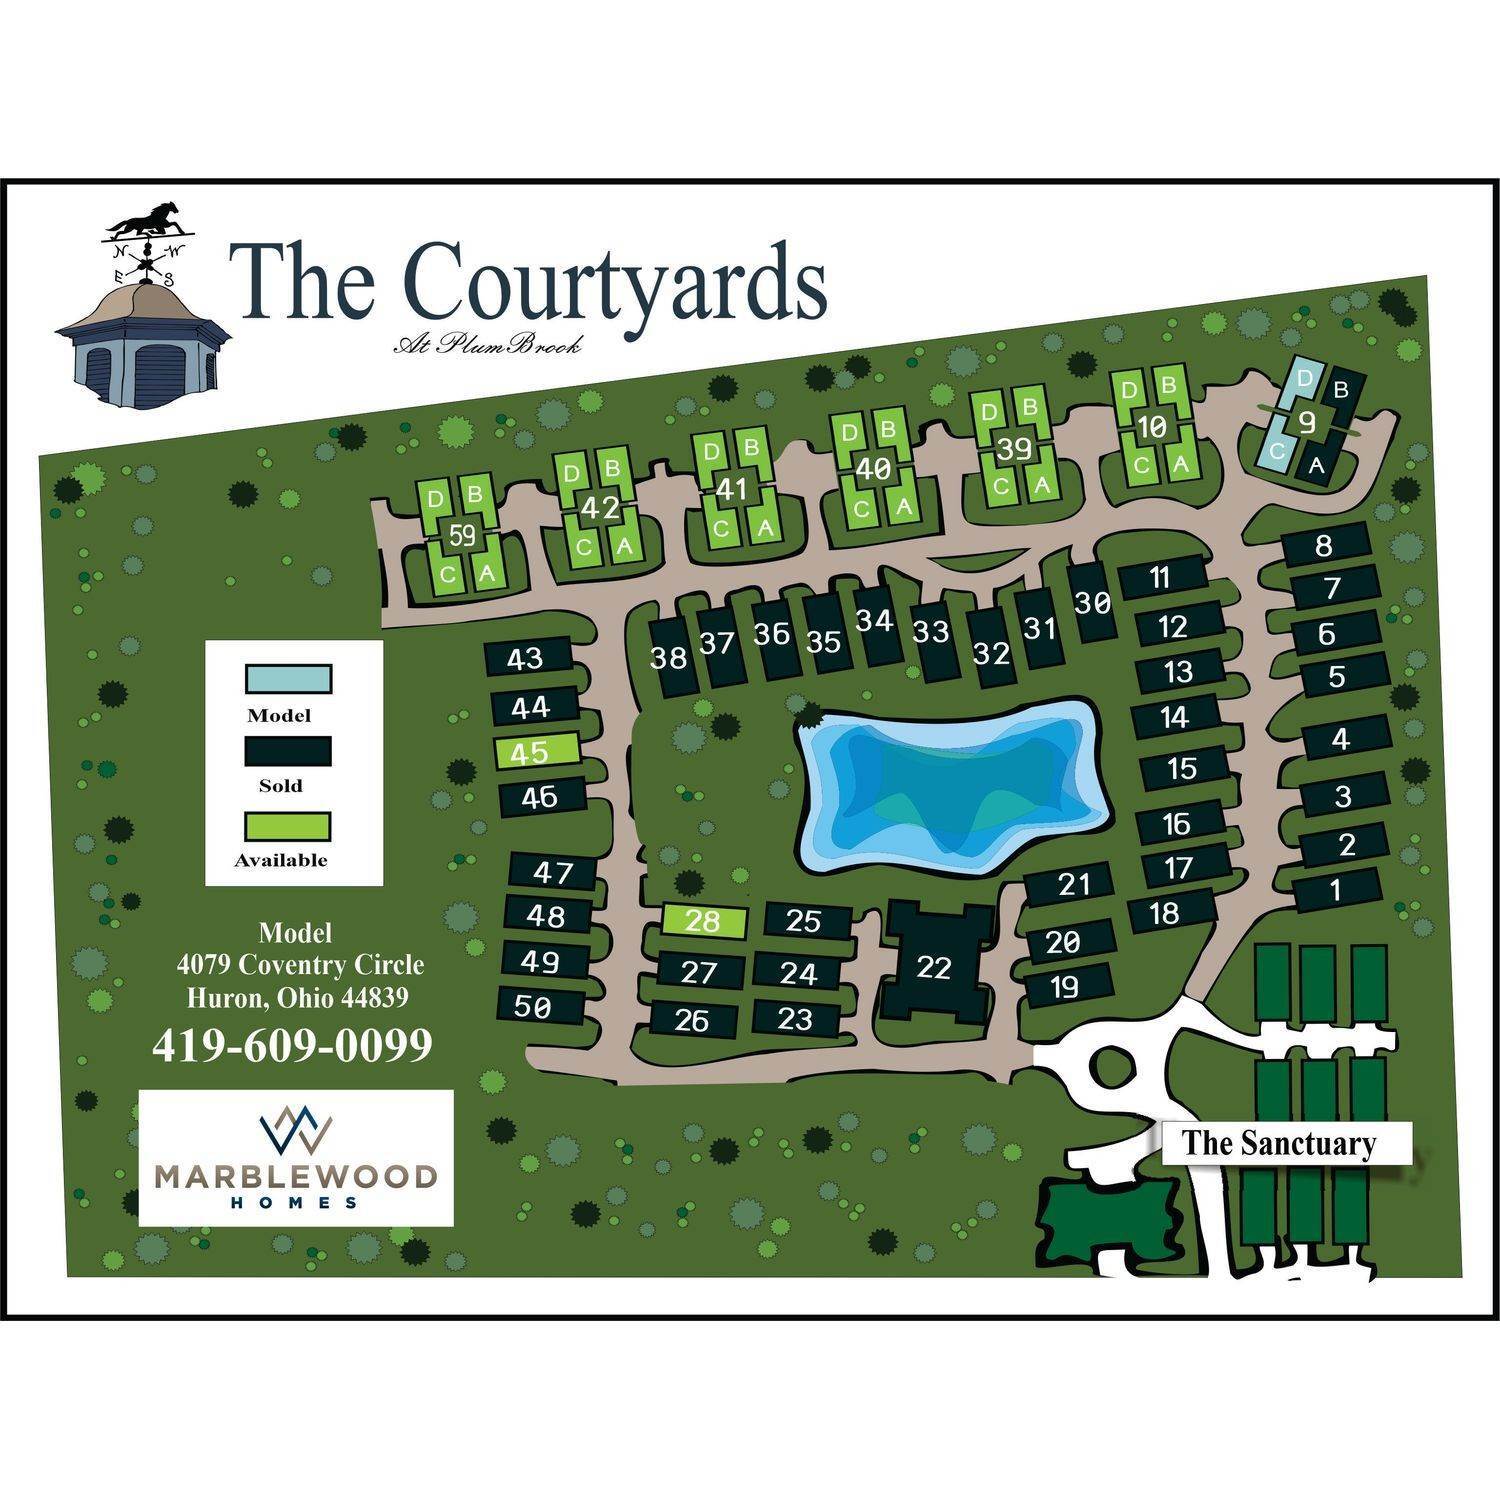 16. The Courtyards at Plum Brook building at 4079 Coventry Circle, Huron, OH 44839